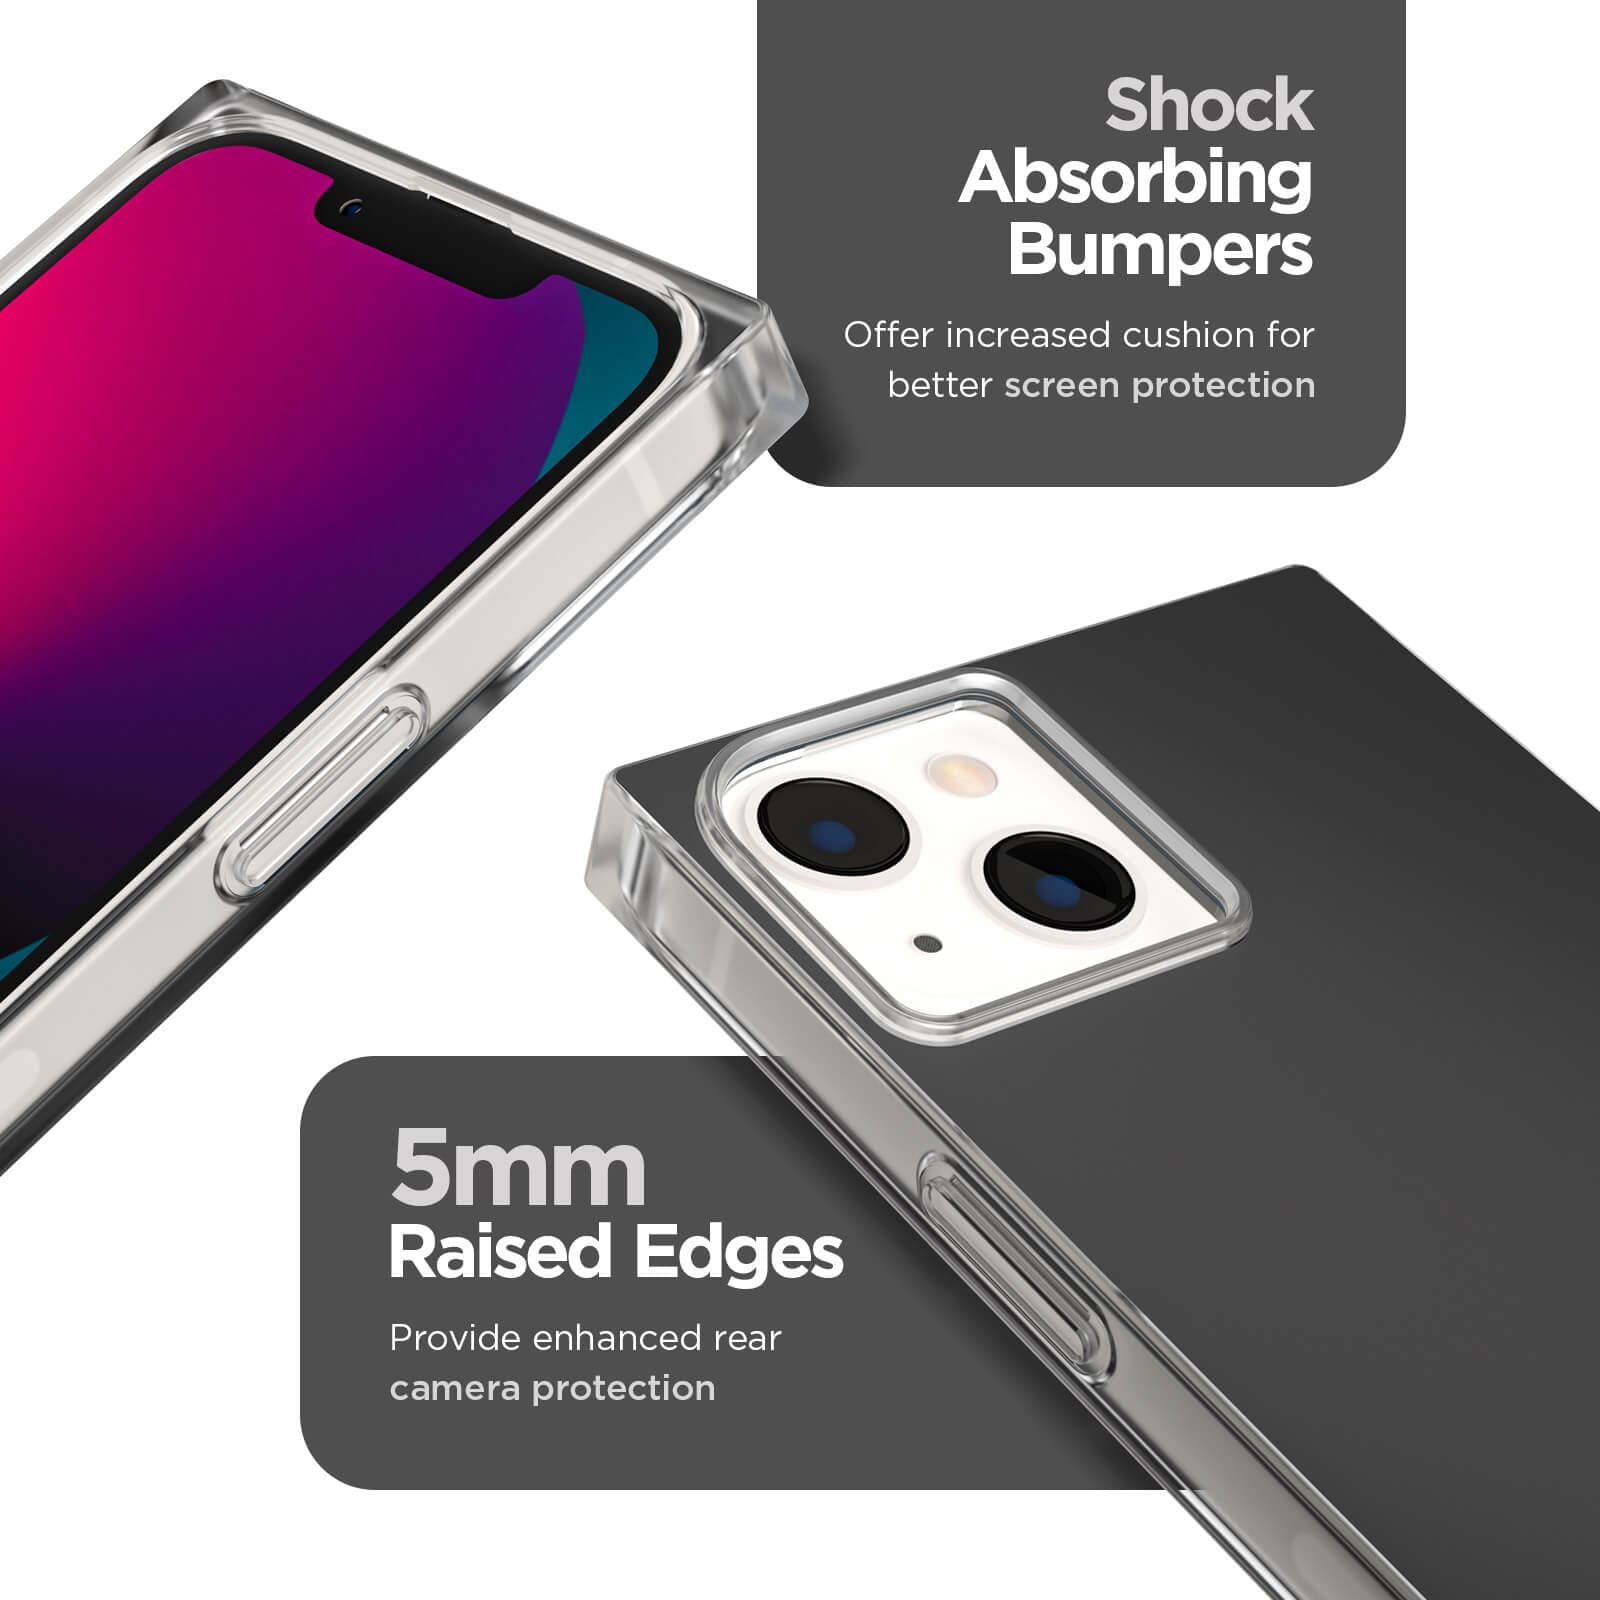 Shock absorbing bumpers. Offer increased cushion for better screen protection. 5mm raised edges provide enhanced rear camera protection. color::Black